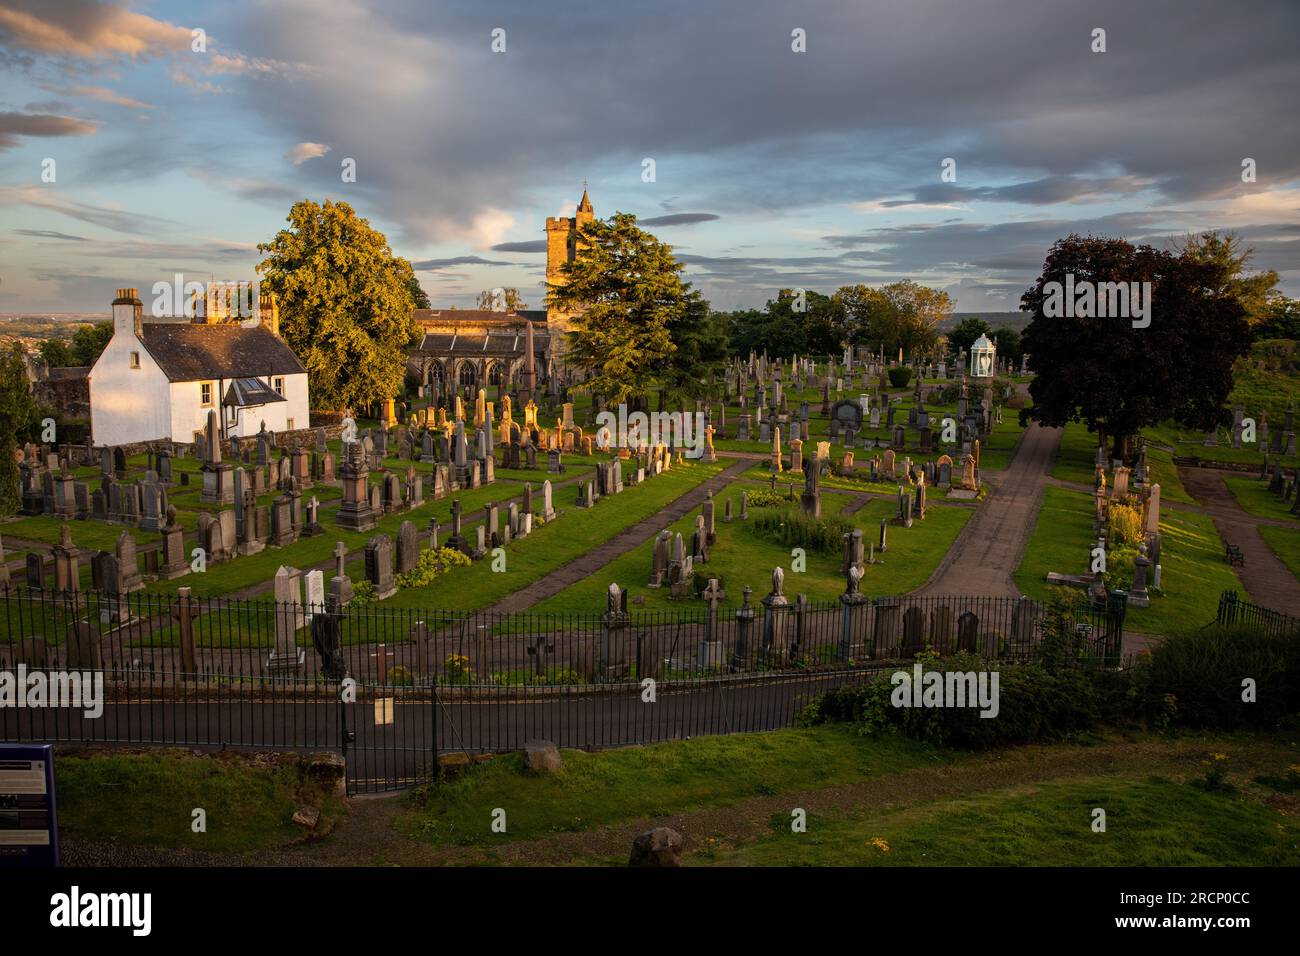 Holy Rude Church and Graveyard, Stirling, Scotland Stock Photo